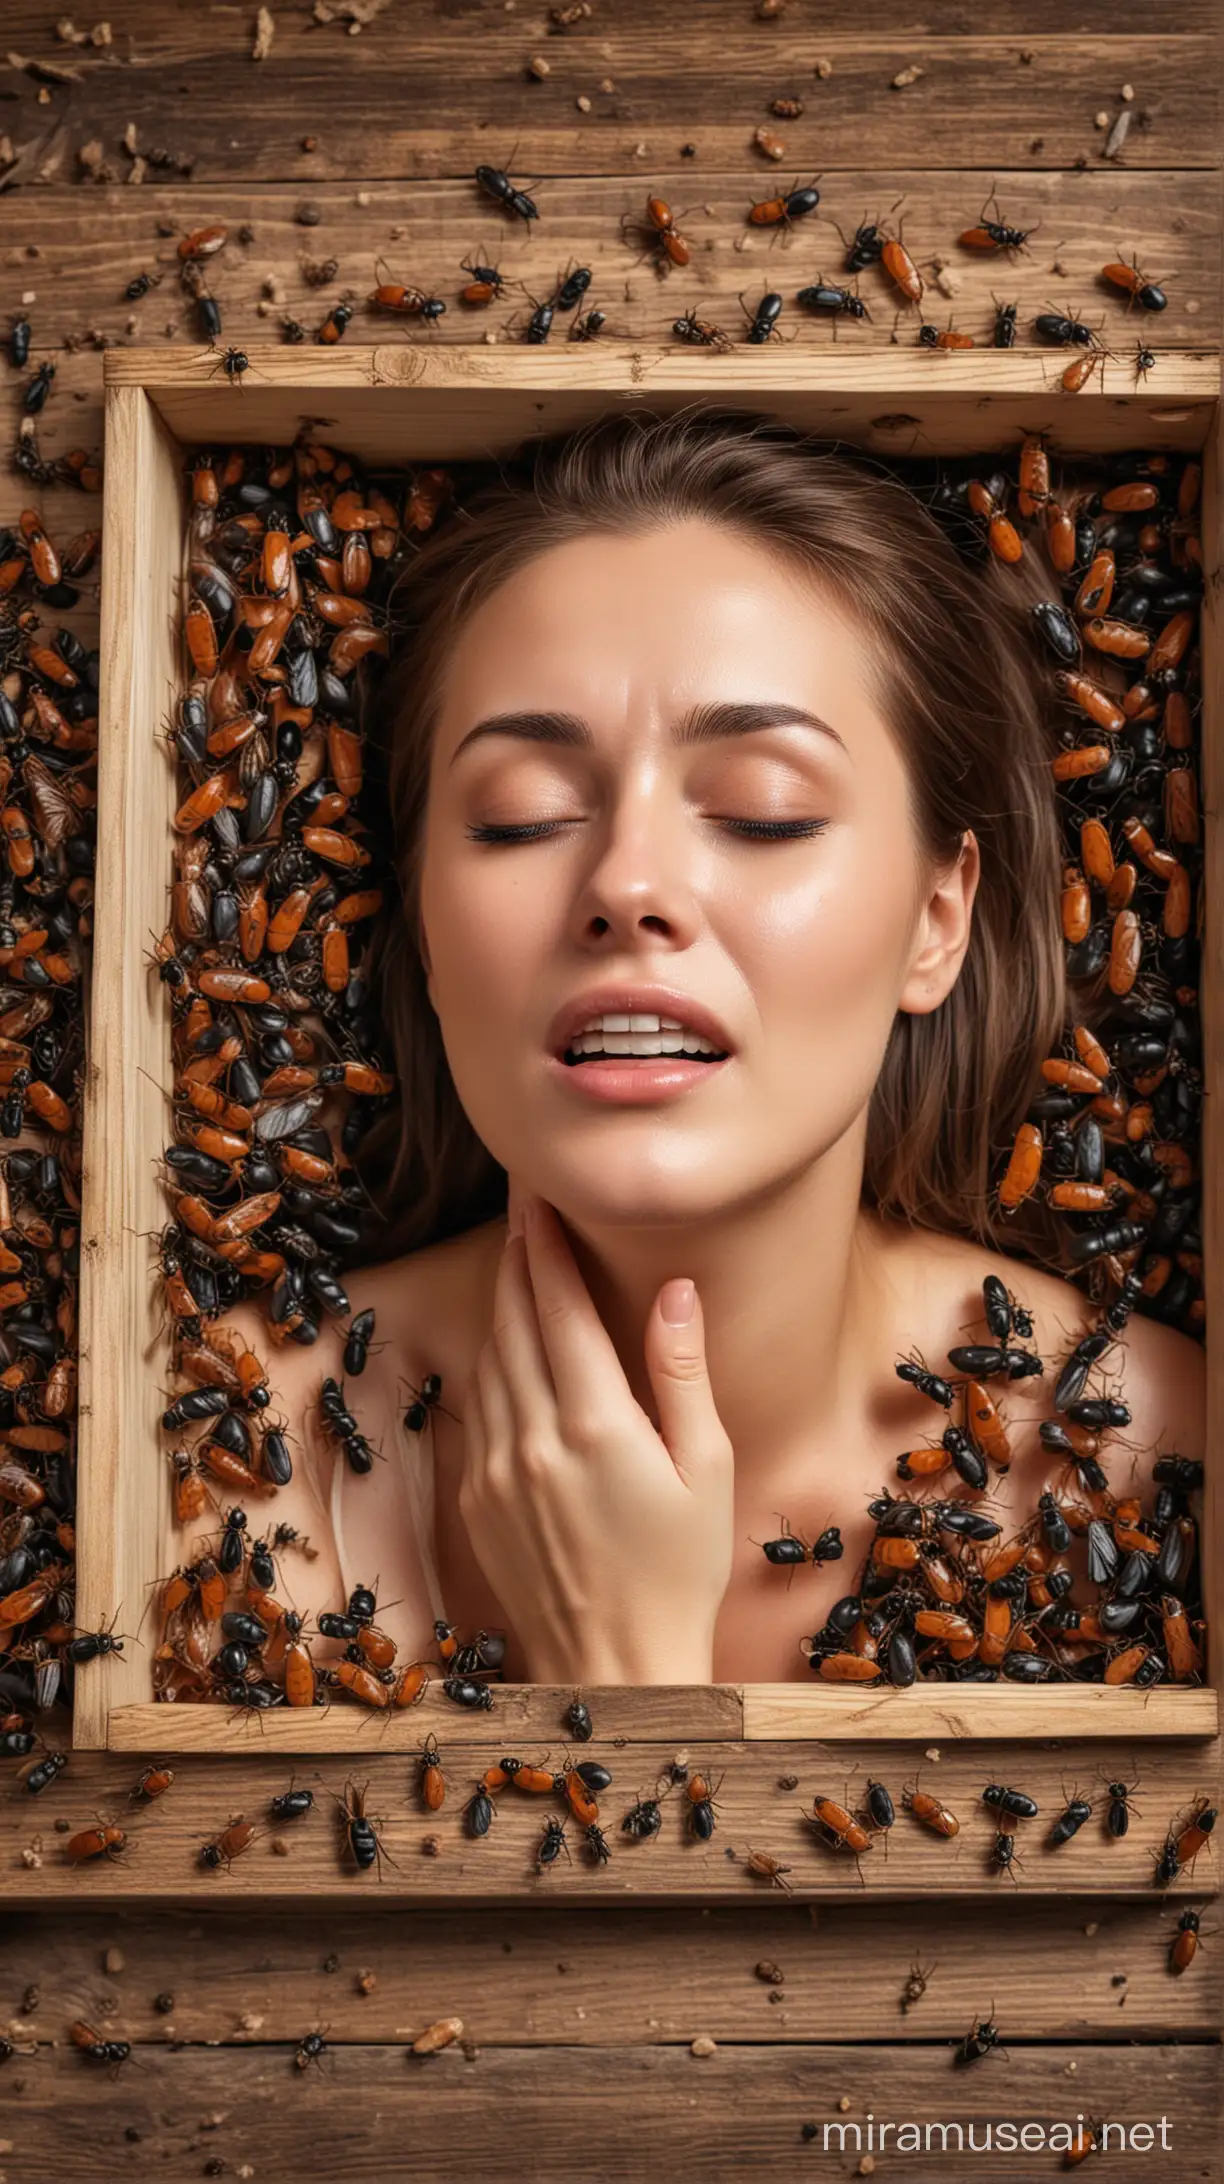 Distressed Woman in Wooden Box Surrounded by Insects